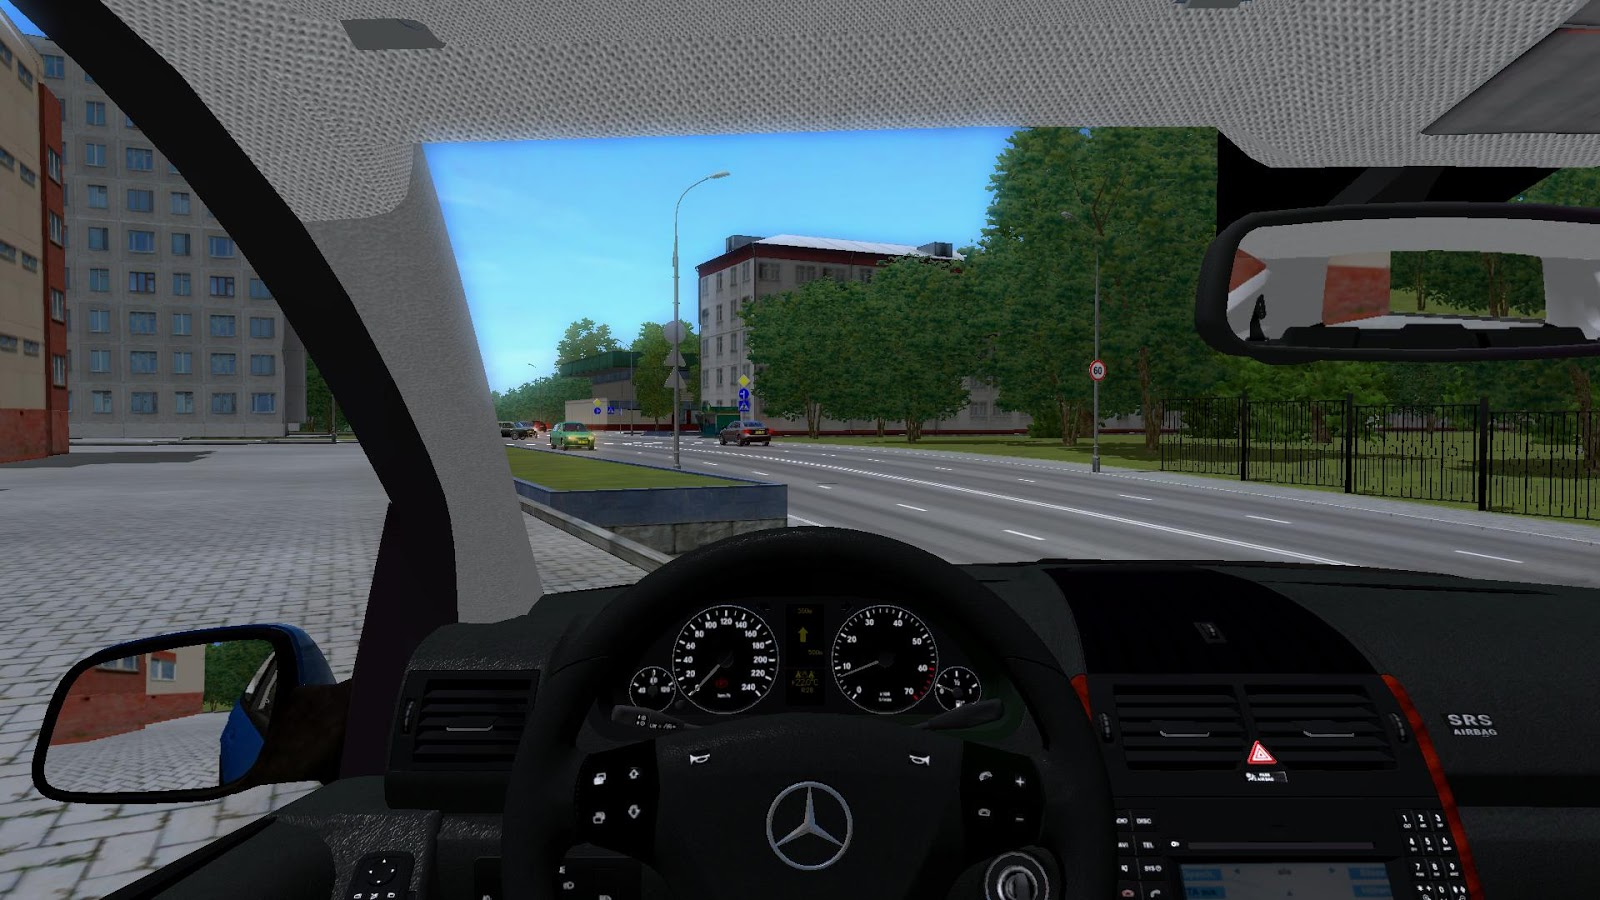 Сити кар драйвинг турбо. City car Driving Mercedes-Benz a200 Coupe. Mercedes a 200 City car Driving. Mercedes e200 Coupe City car Driving Simulator. City car Driving Simulator 2.